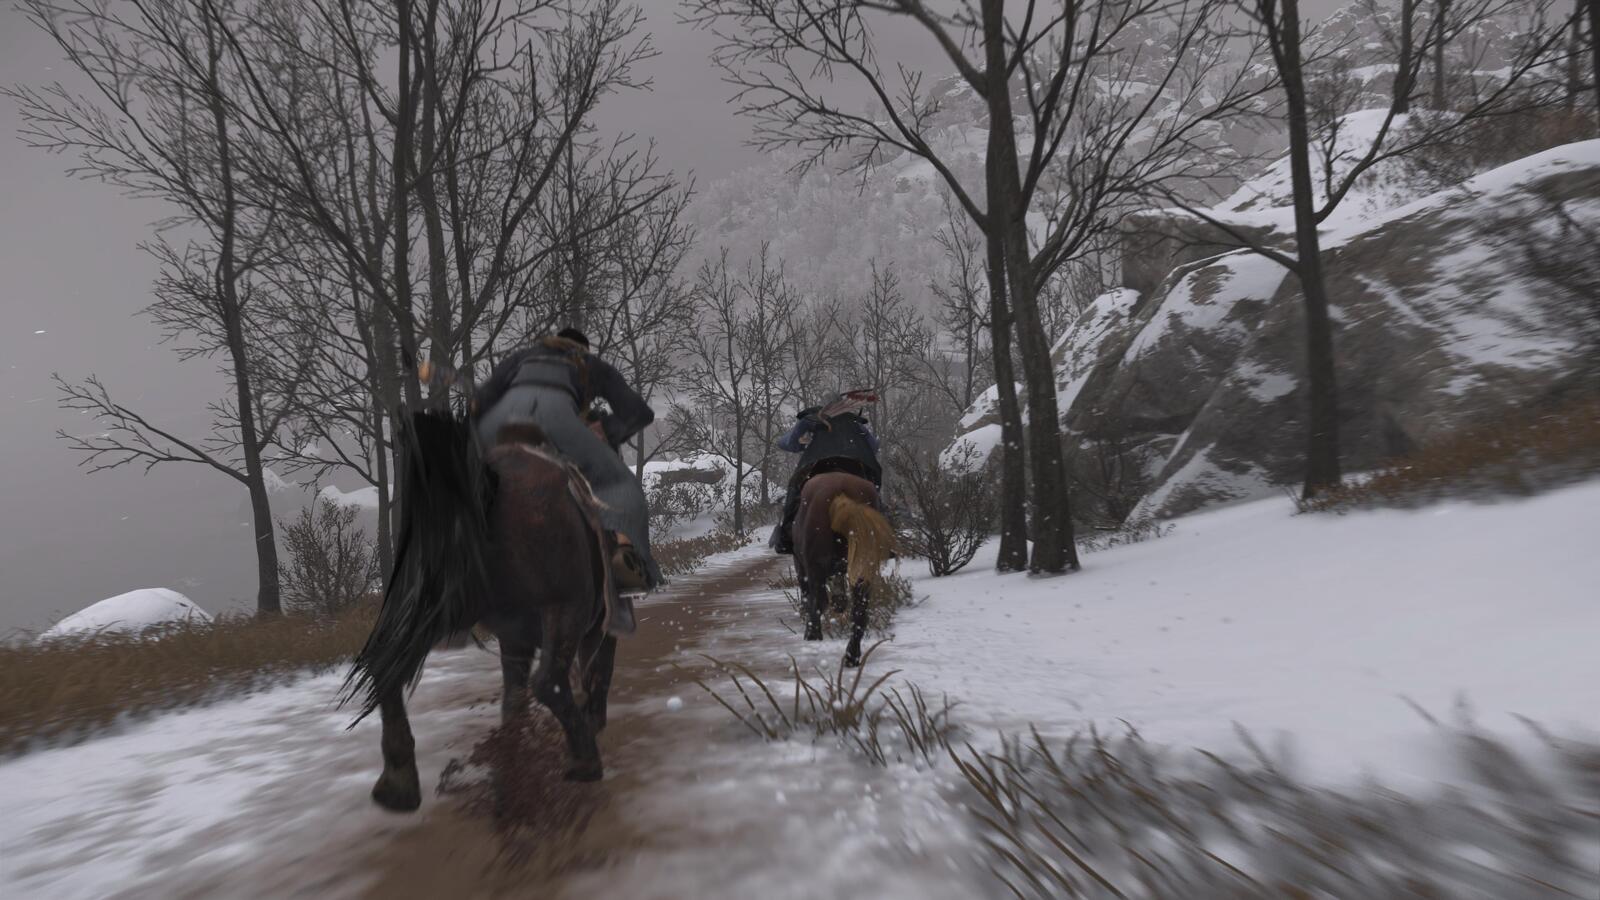 Two people riding on horses through the snow